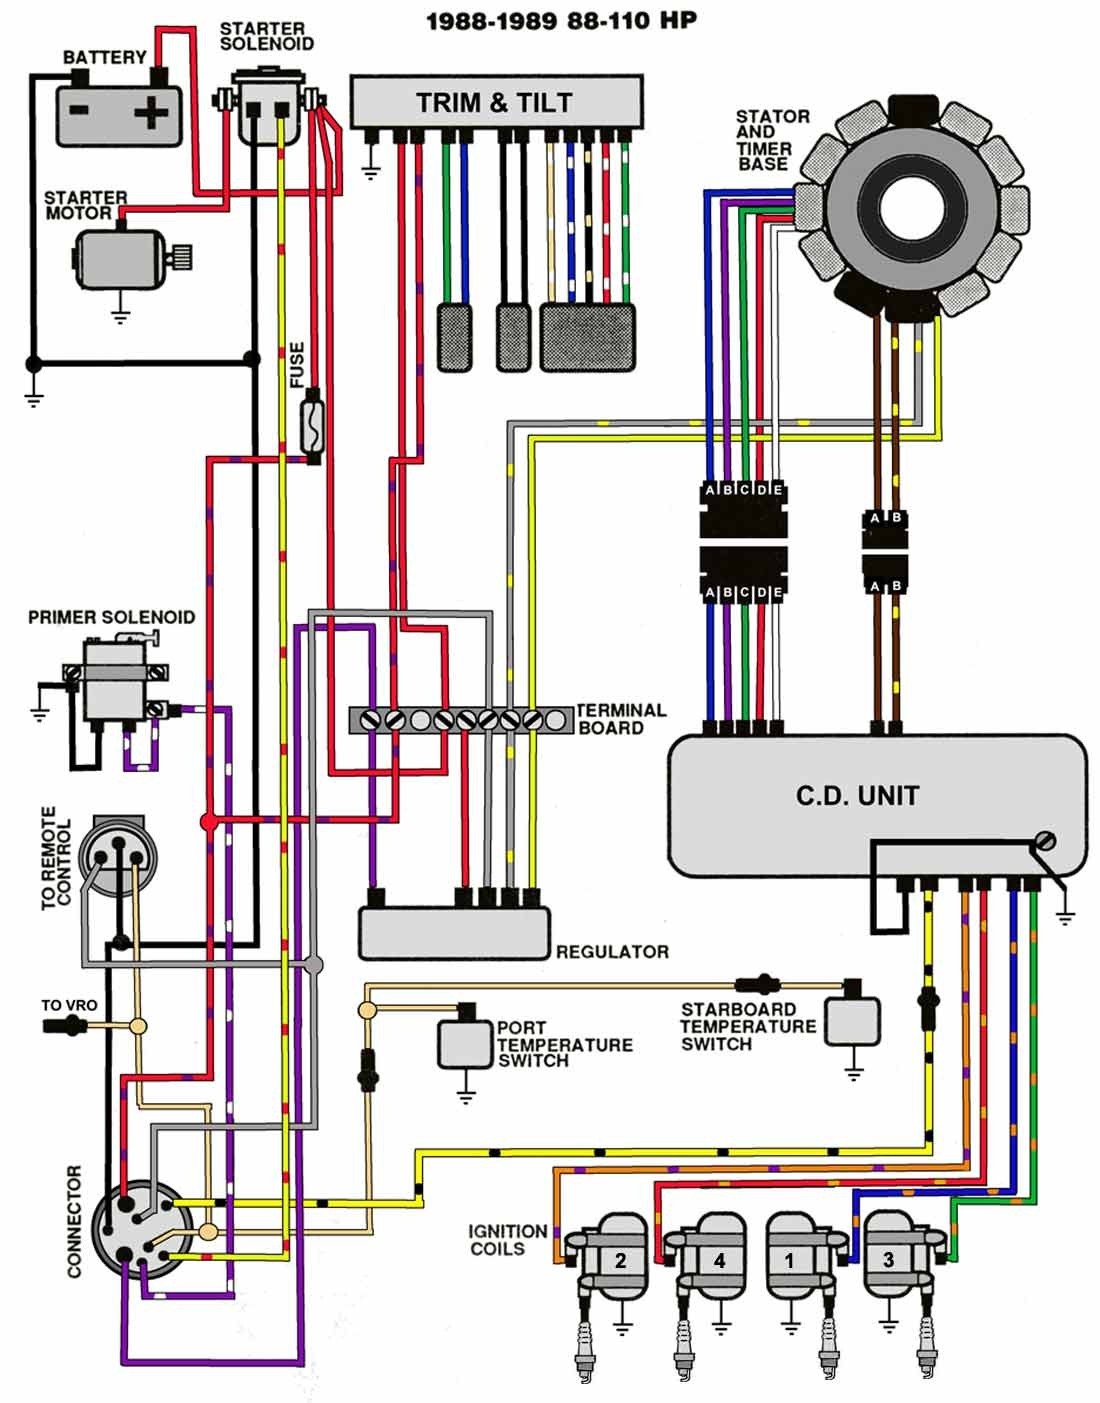 wiring harness for johnson outboards car fuse box wiring diagram u2022 rh champs co Yamaha Outboard Gauge Wiring Diagram Yamaha Outboard Gauge Wiring